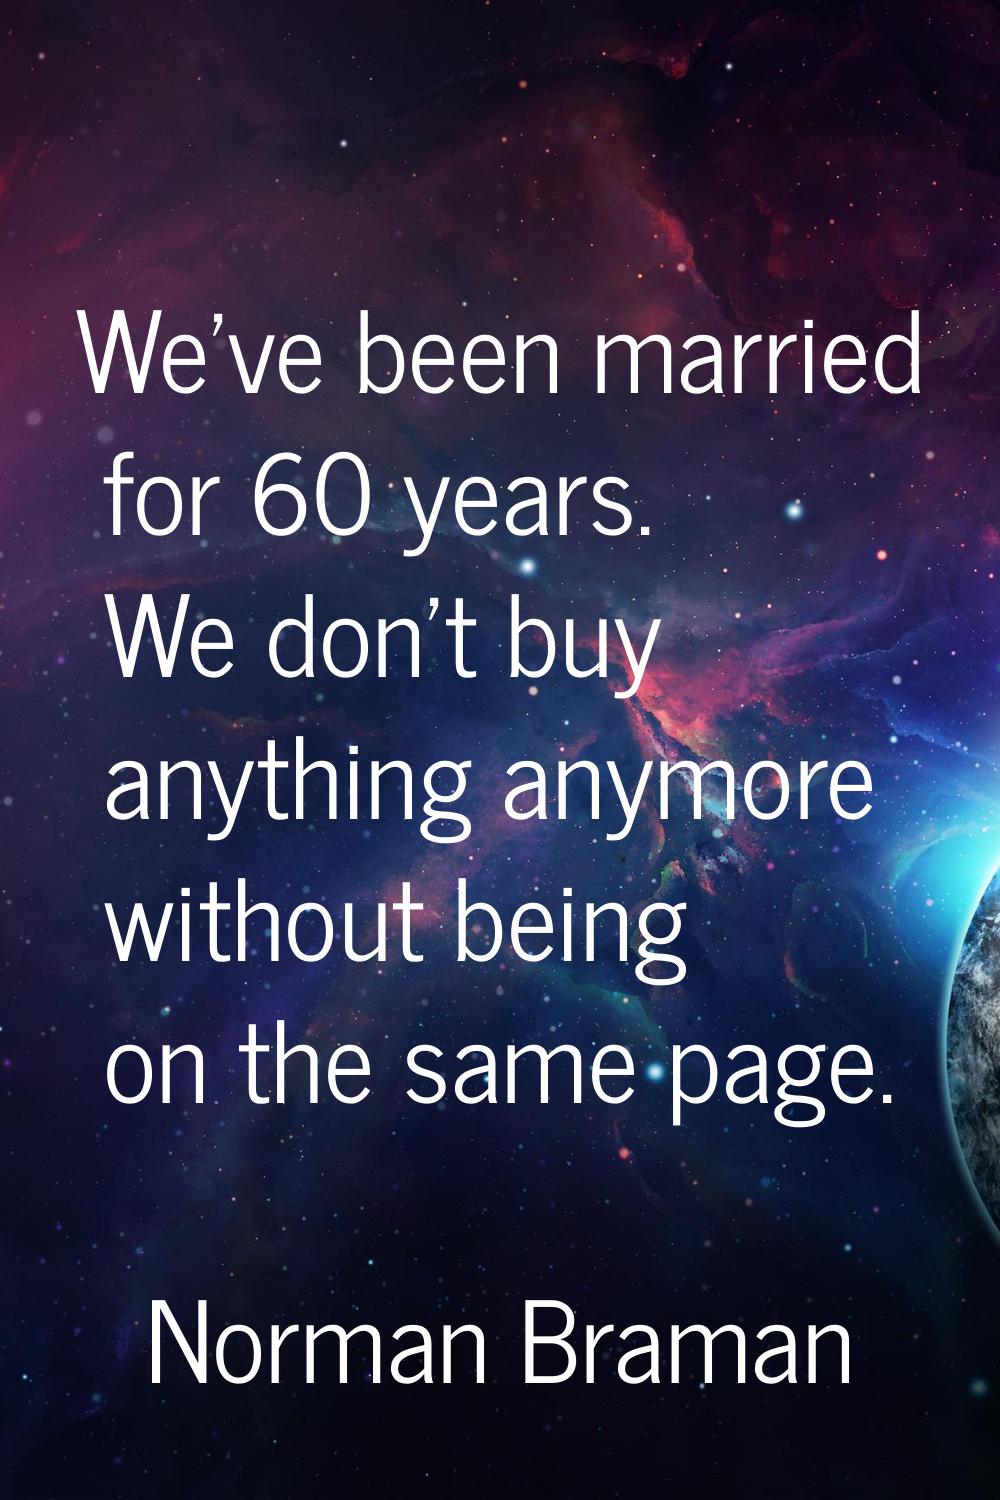 We've been married for 60 years. We don't buy anything anymore without being on the same page.